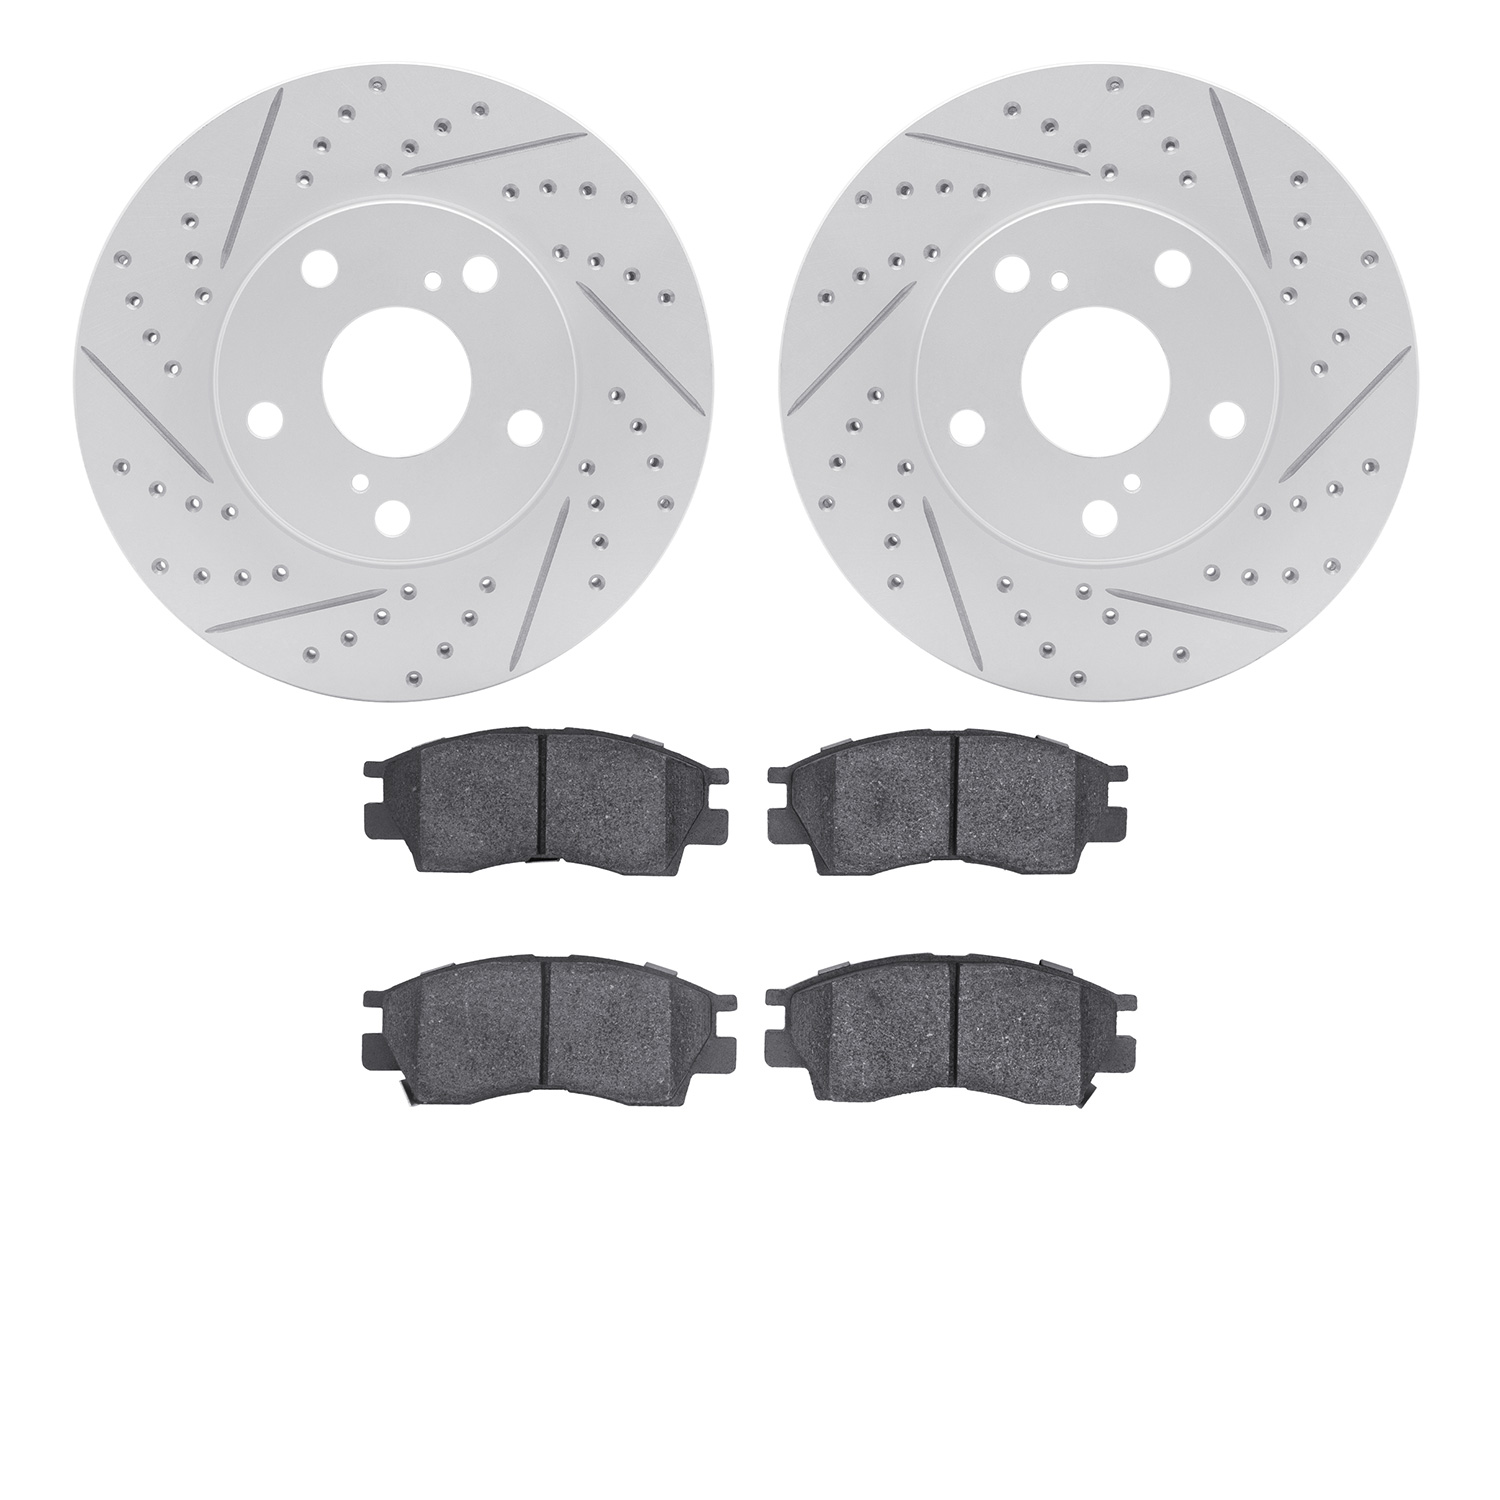 2502-76001 Geoperformance Drilled/Slotted Rotors w/5000 Advanced Brake Pads Kit, 1992-2003 Lexus/Toyota/Scion, Position: Front